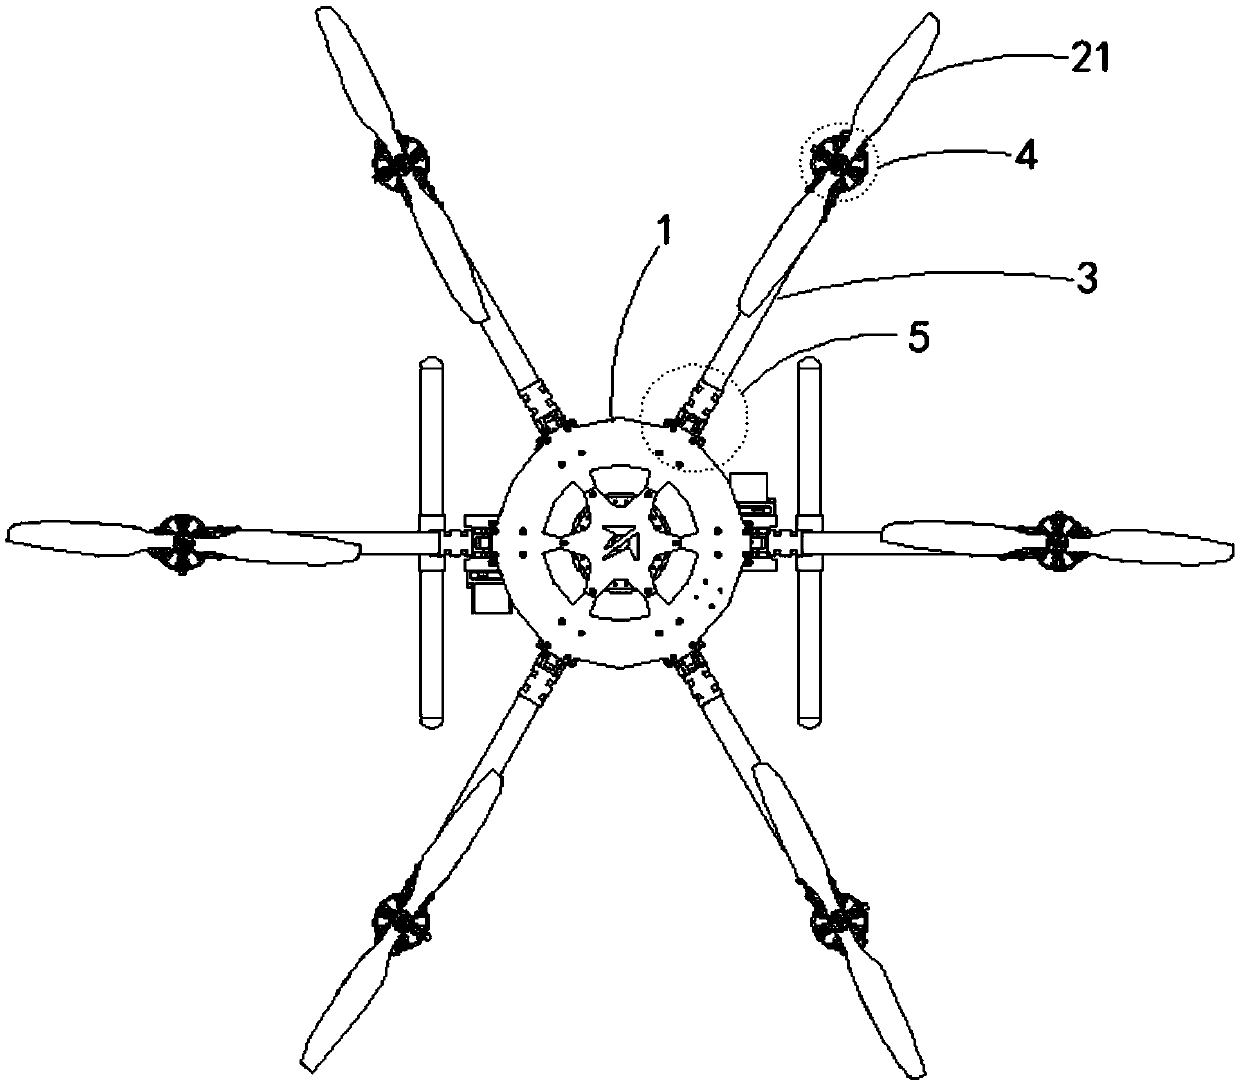 Multi-rotor structure applied in unmanned aerial vehicle